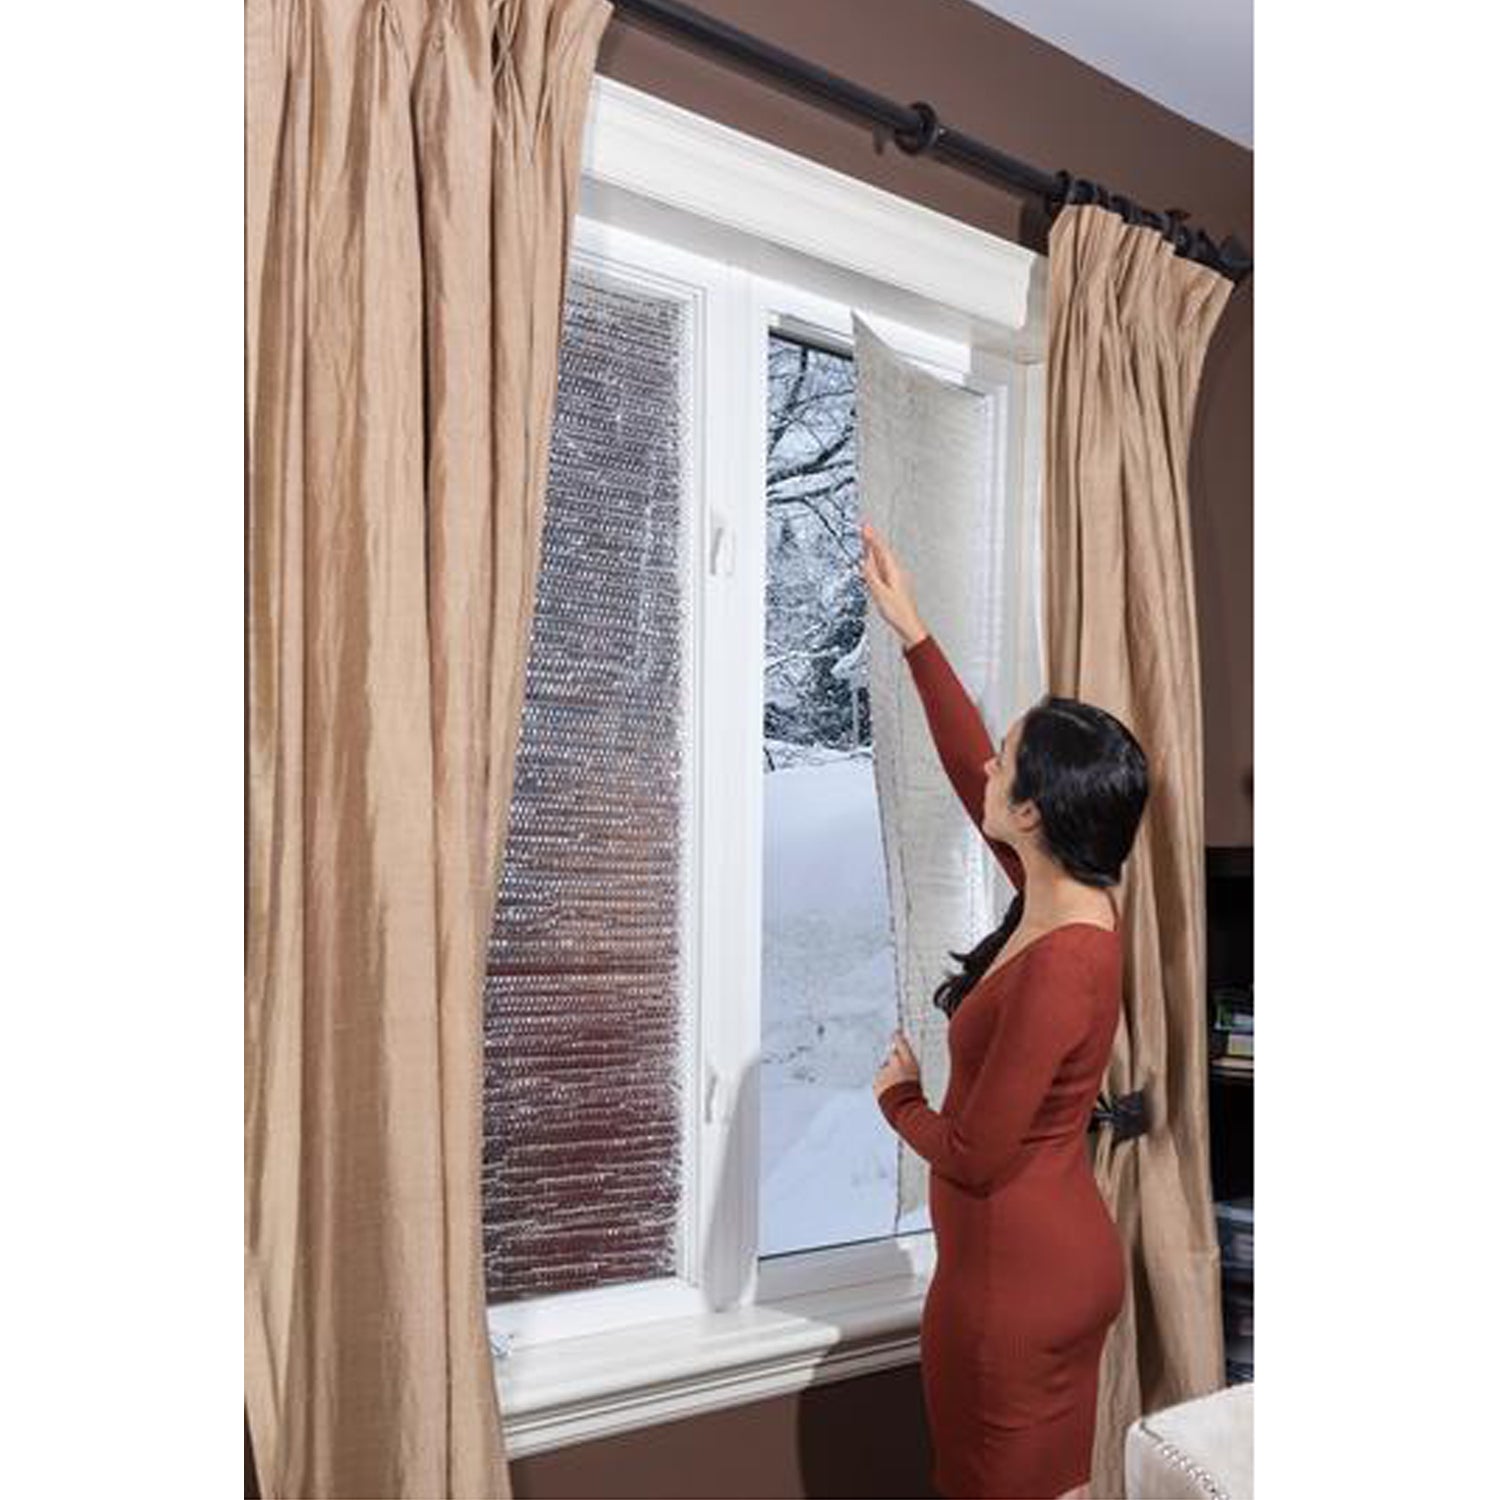 Window Thermal Insulation Panels: 48” X 48” (Double Thickness) 2 Panels/Kit